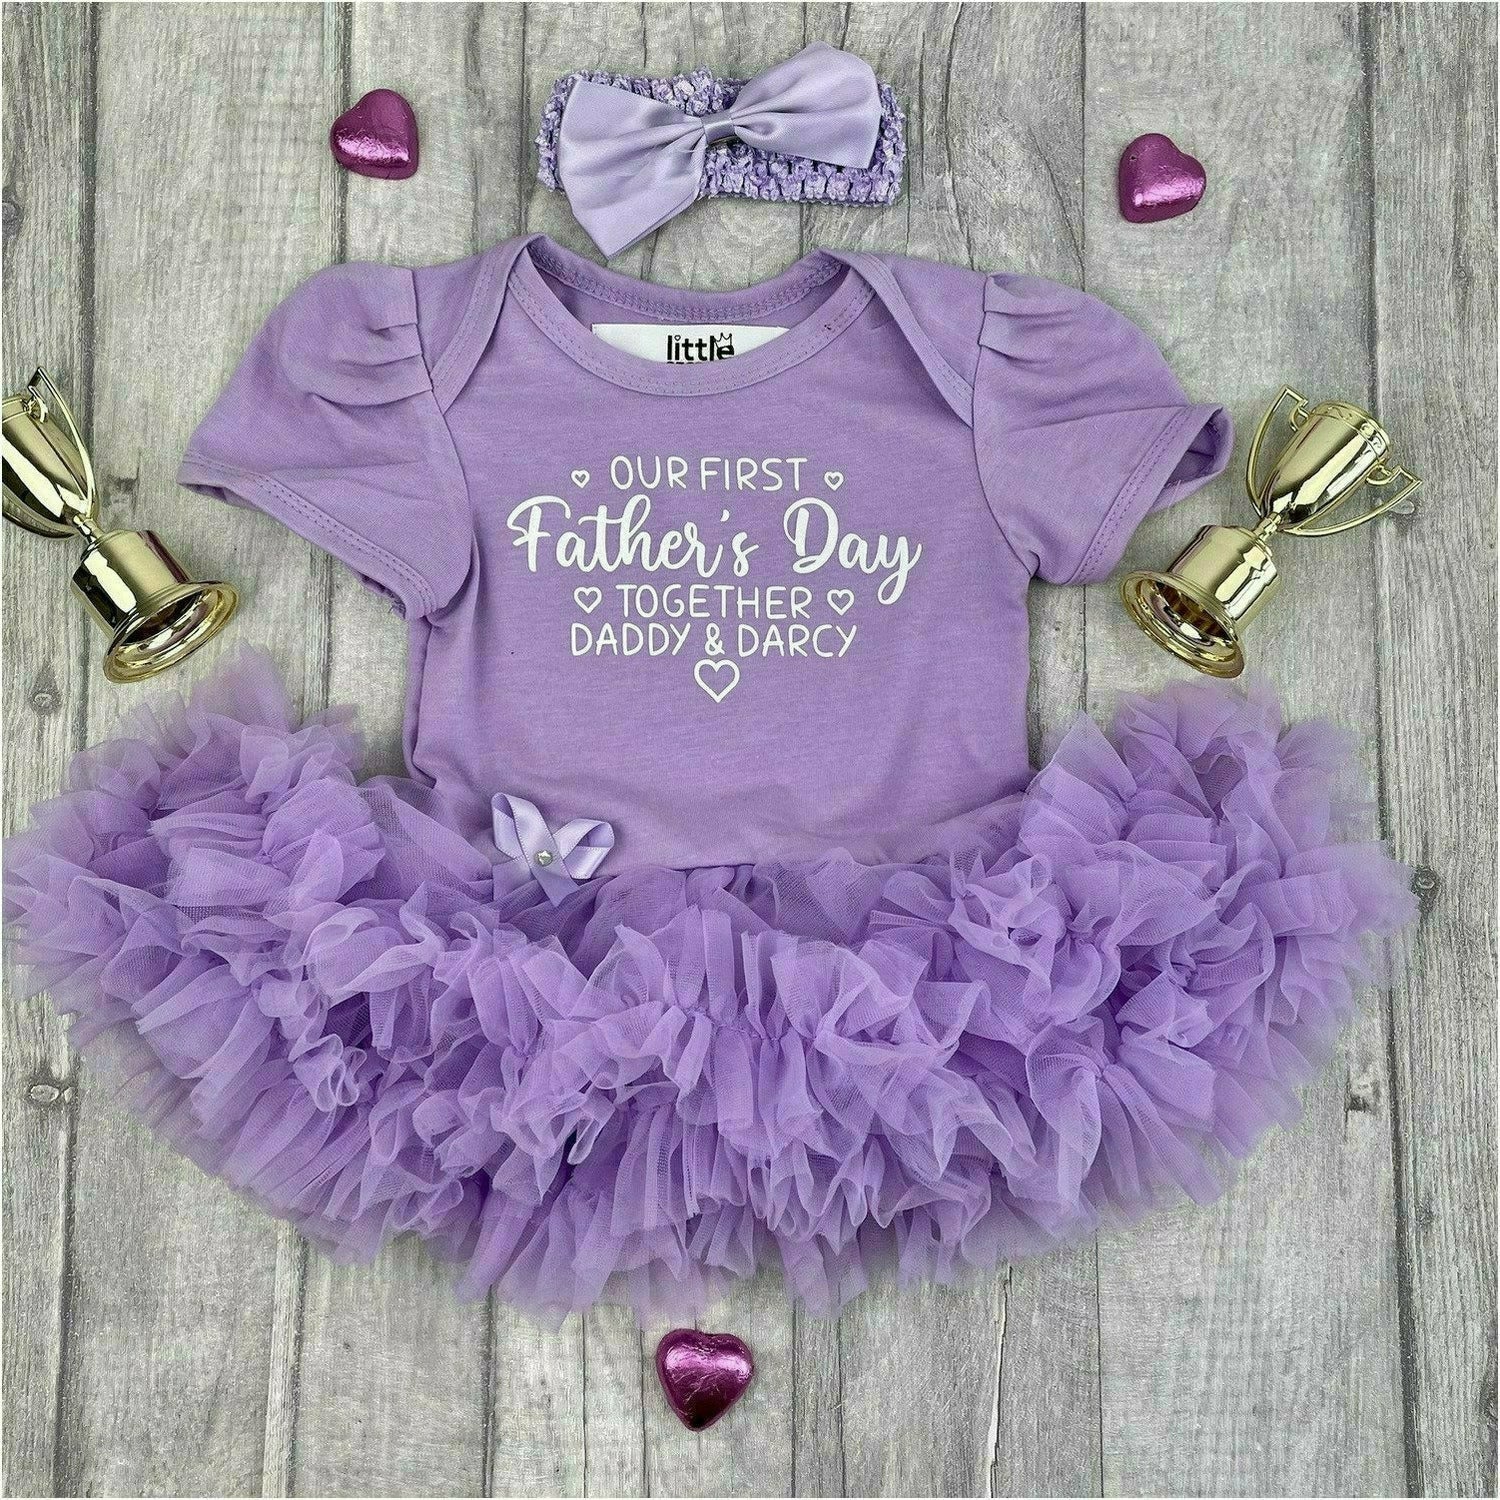 Personalised Our First Fathers Day Tutu Set Outfit My First Fathers Day Cute 